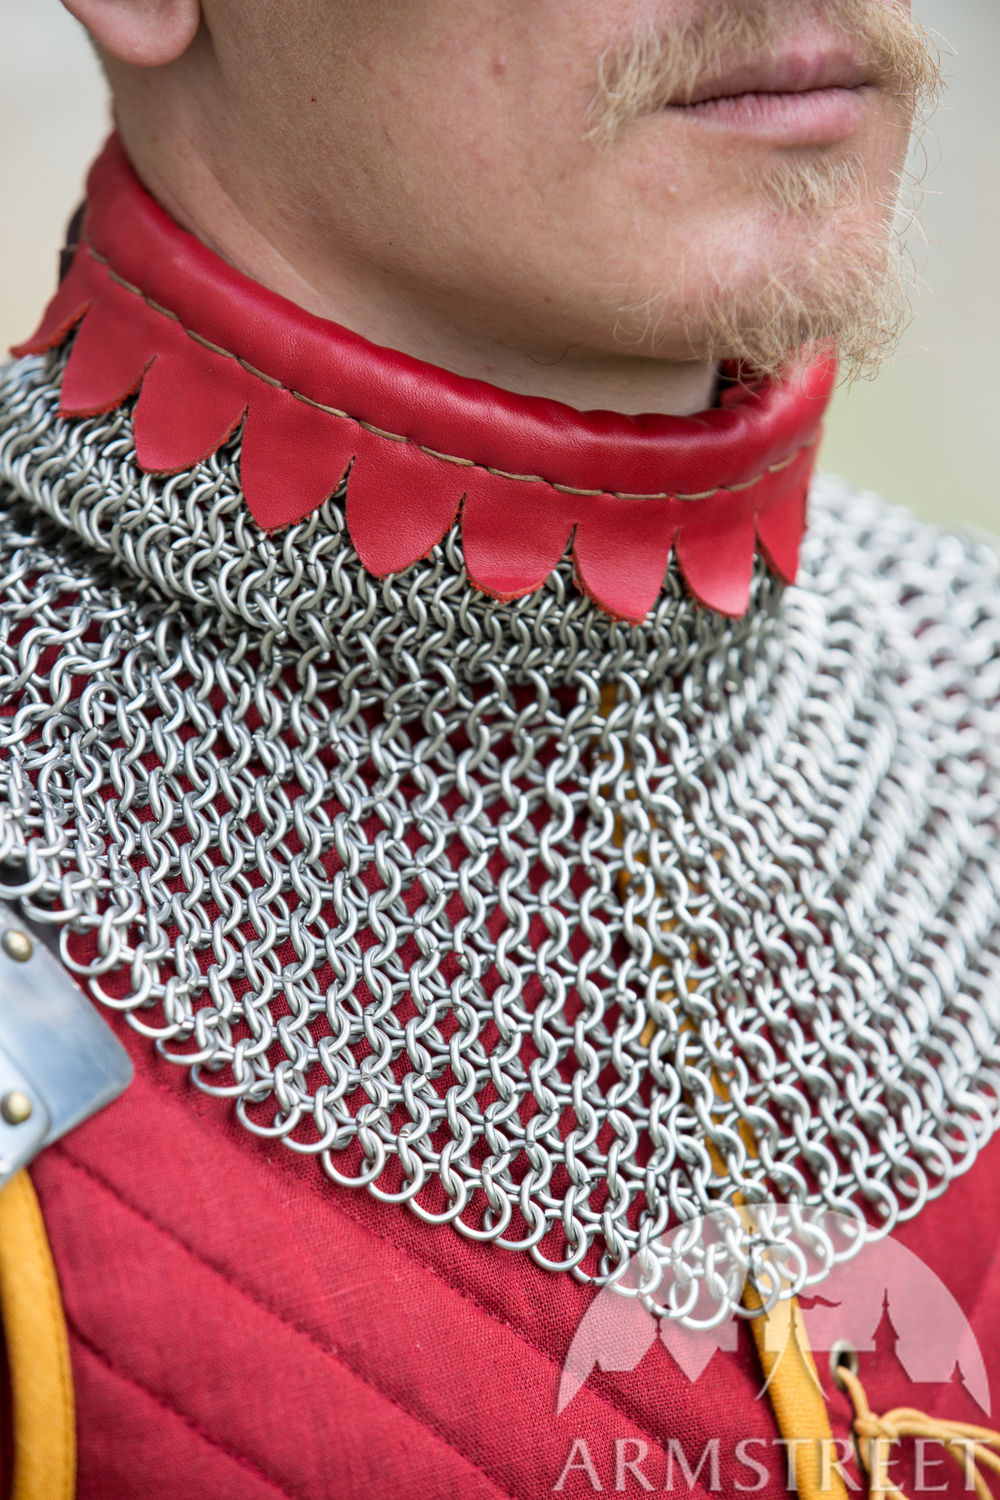 Stainless steel chainmail gorget decorated with leather accents